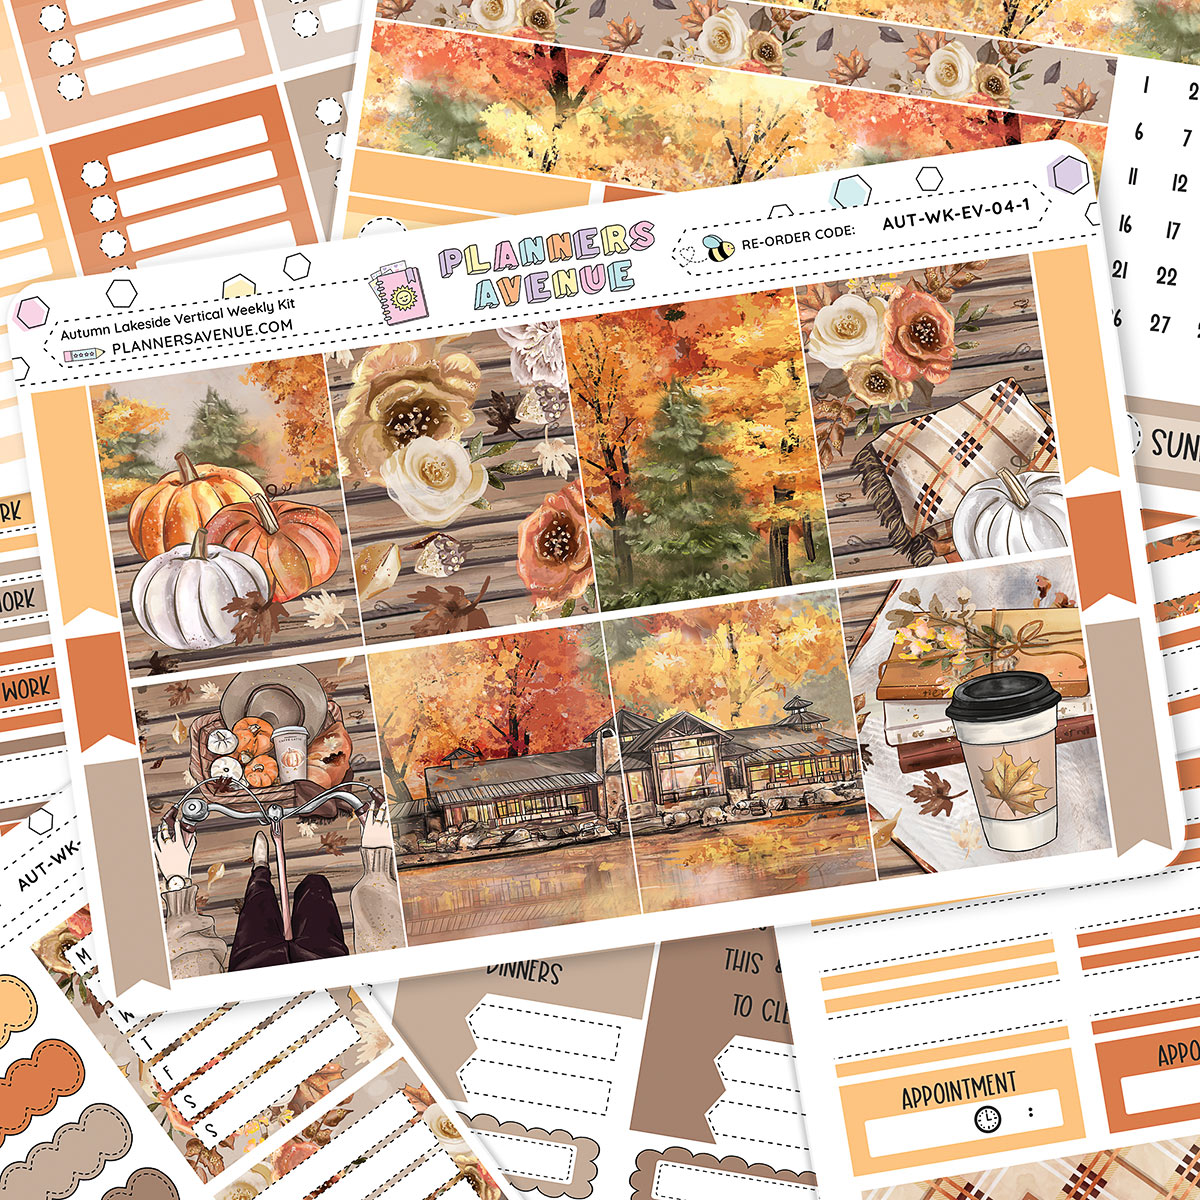 Autumn Lake Vertical Weekly Sticker Foiled Kit (ROSE GOLD FOIL)